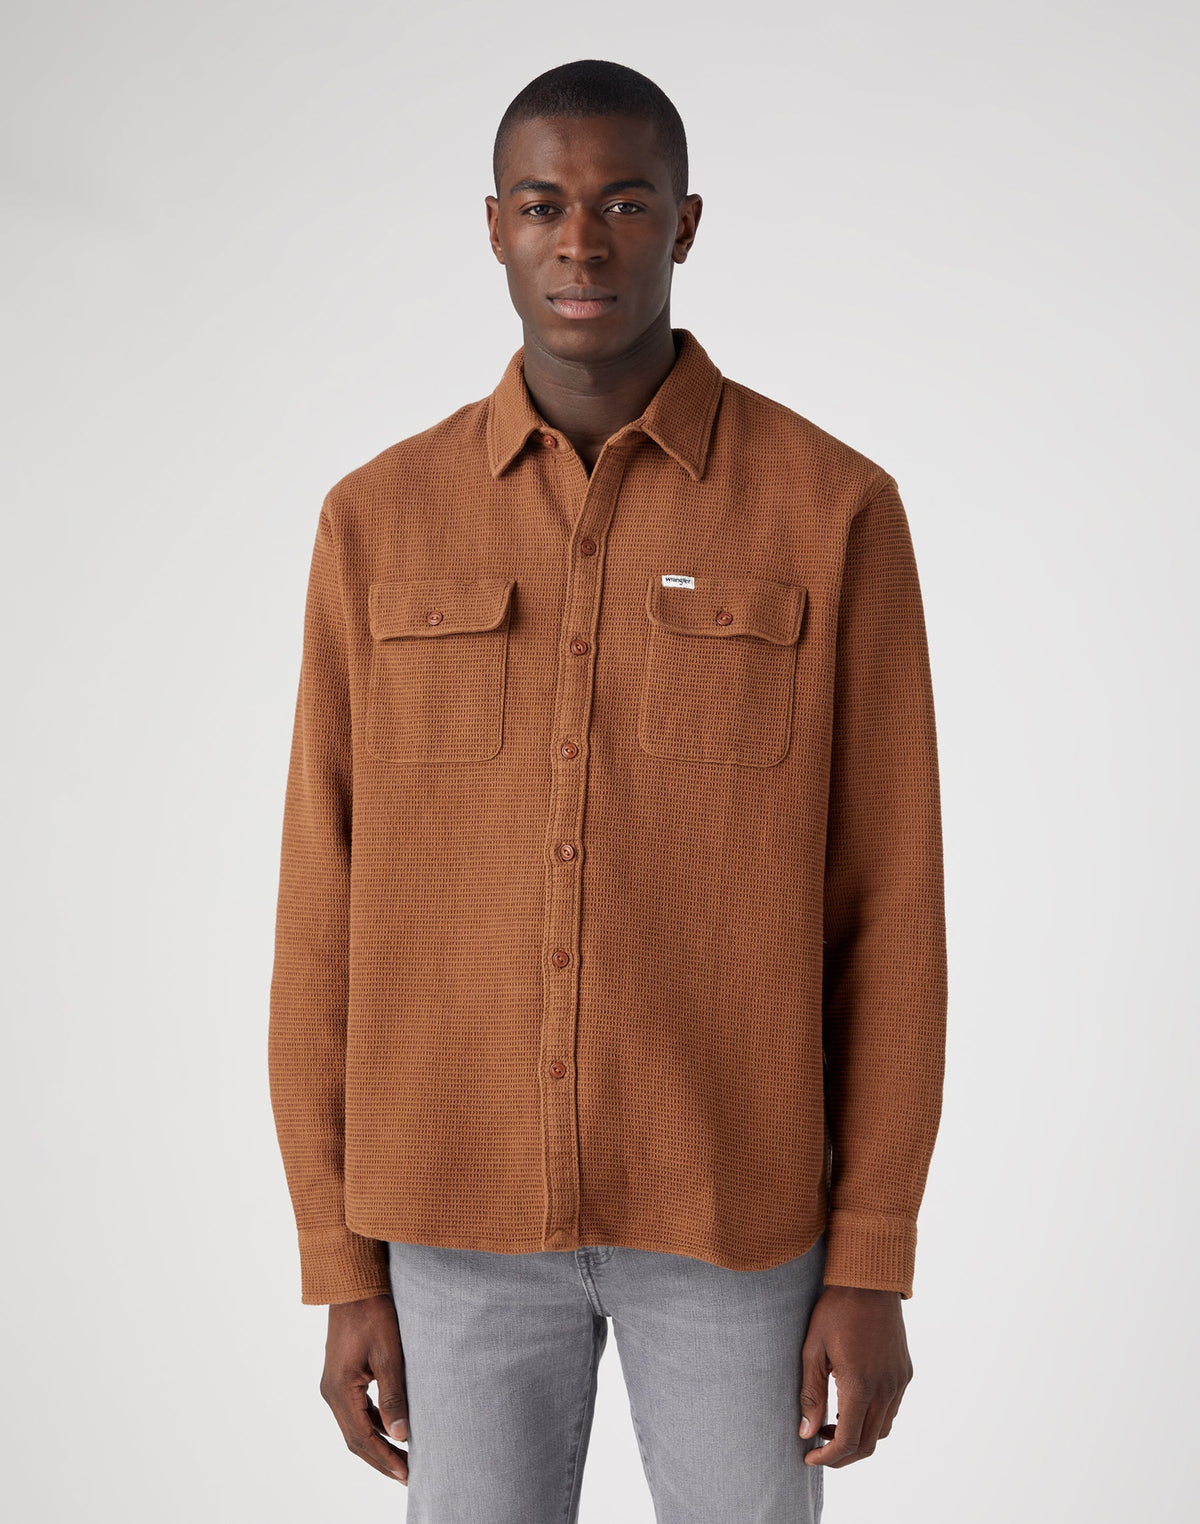 Overshirt in Toffee